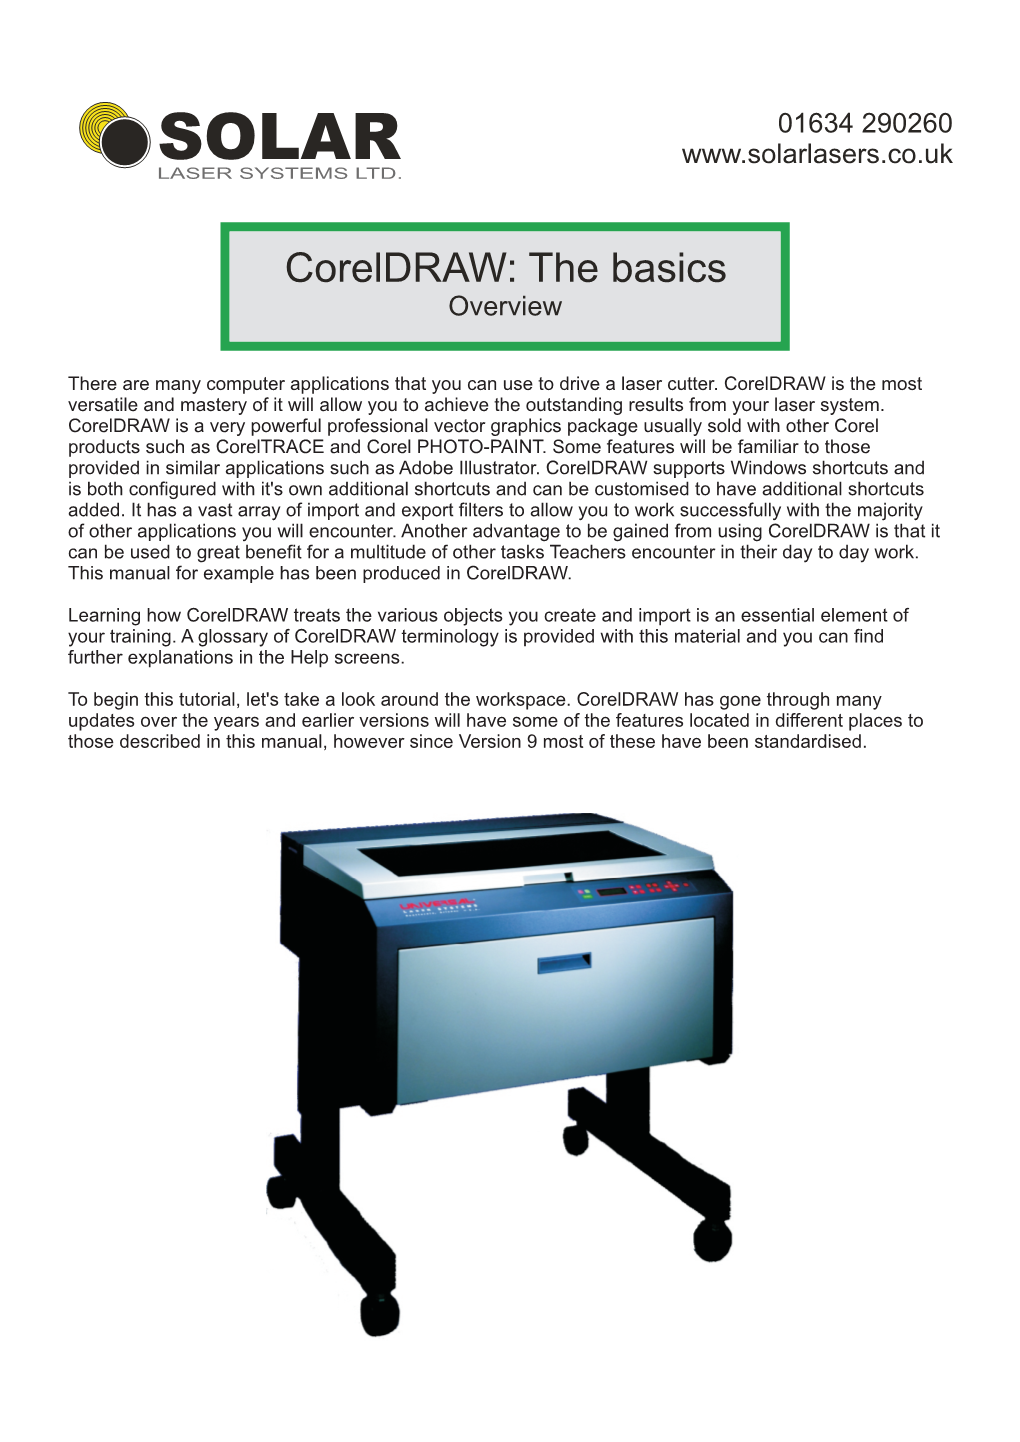 How to Use Coreldraw